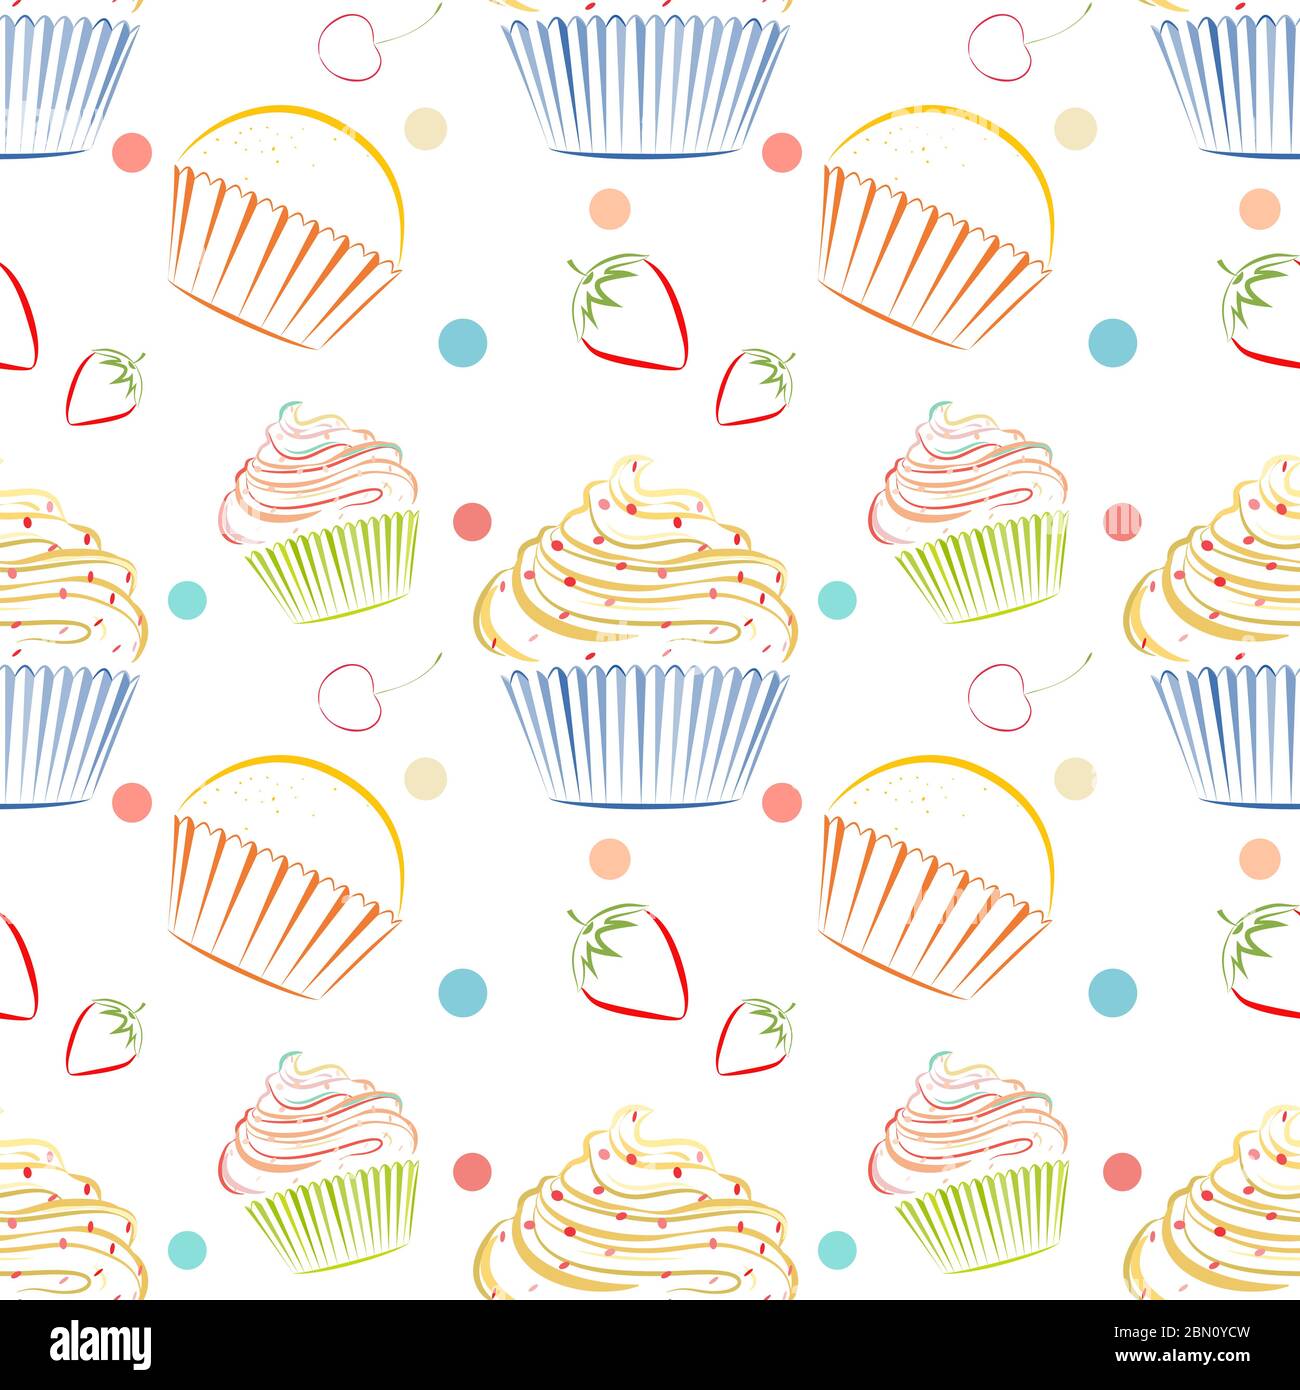 Elegant vector seamless pattern with different cupcakes. Unique doodle style line drawing food background with dessert as main theme. Kitchen themed w Stock Vector